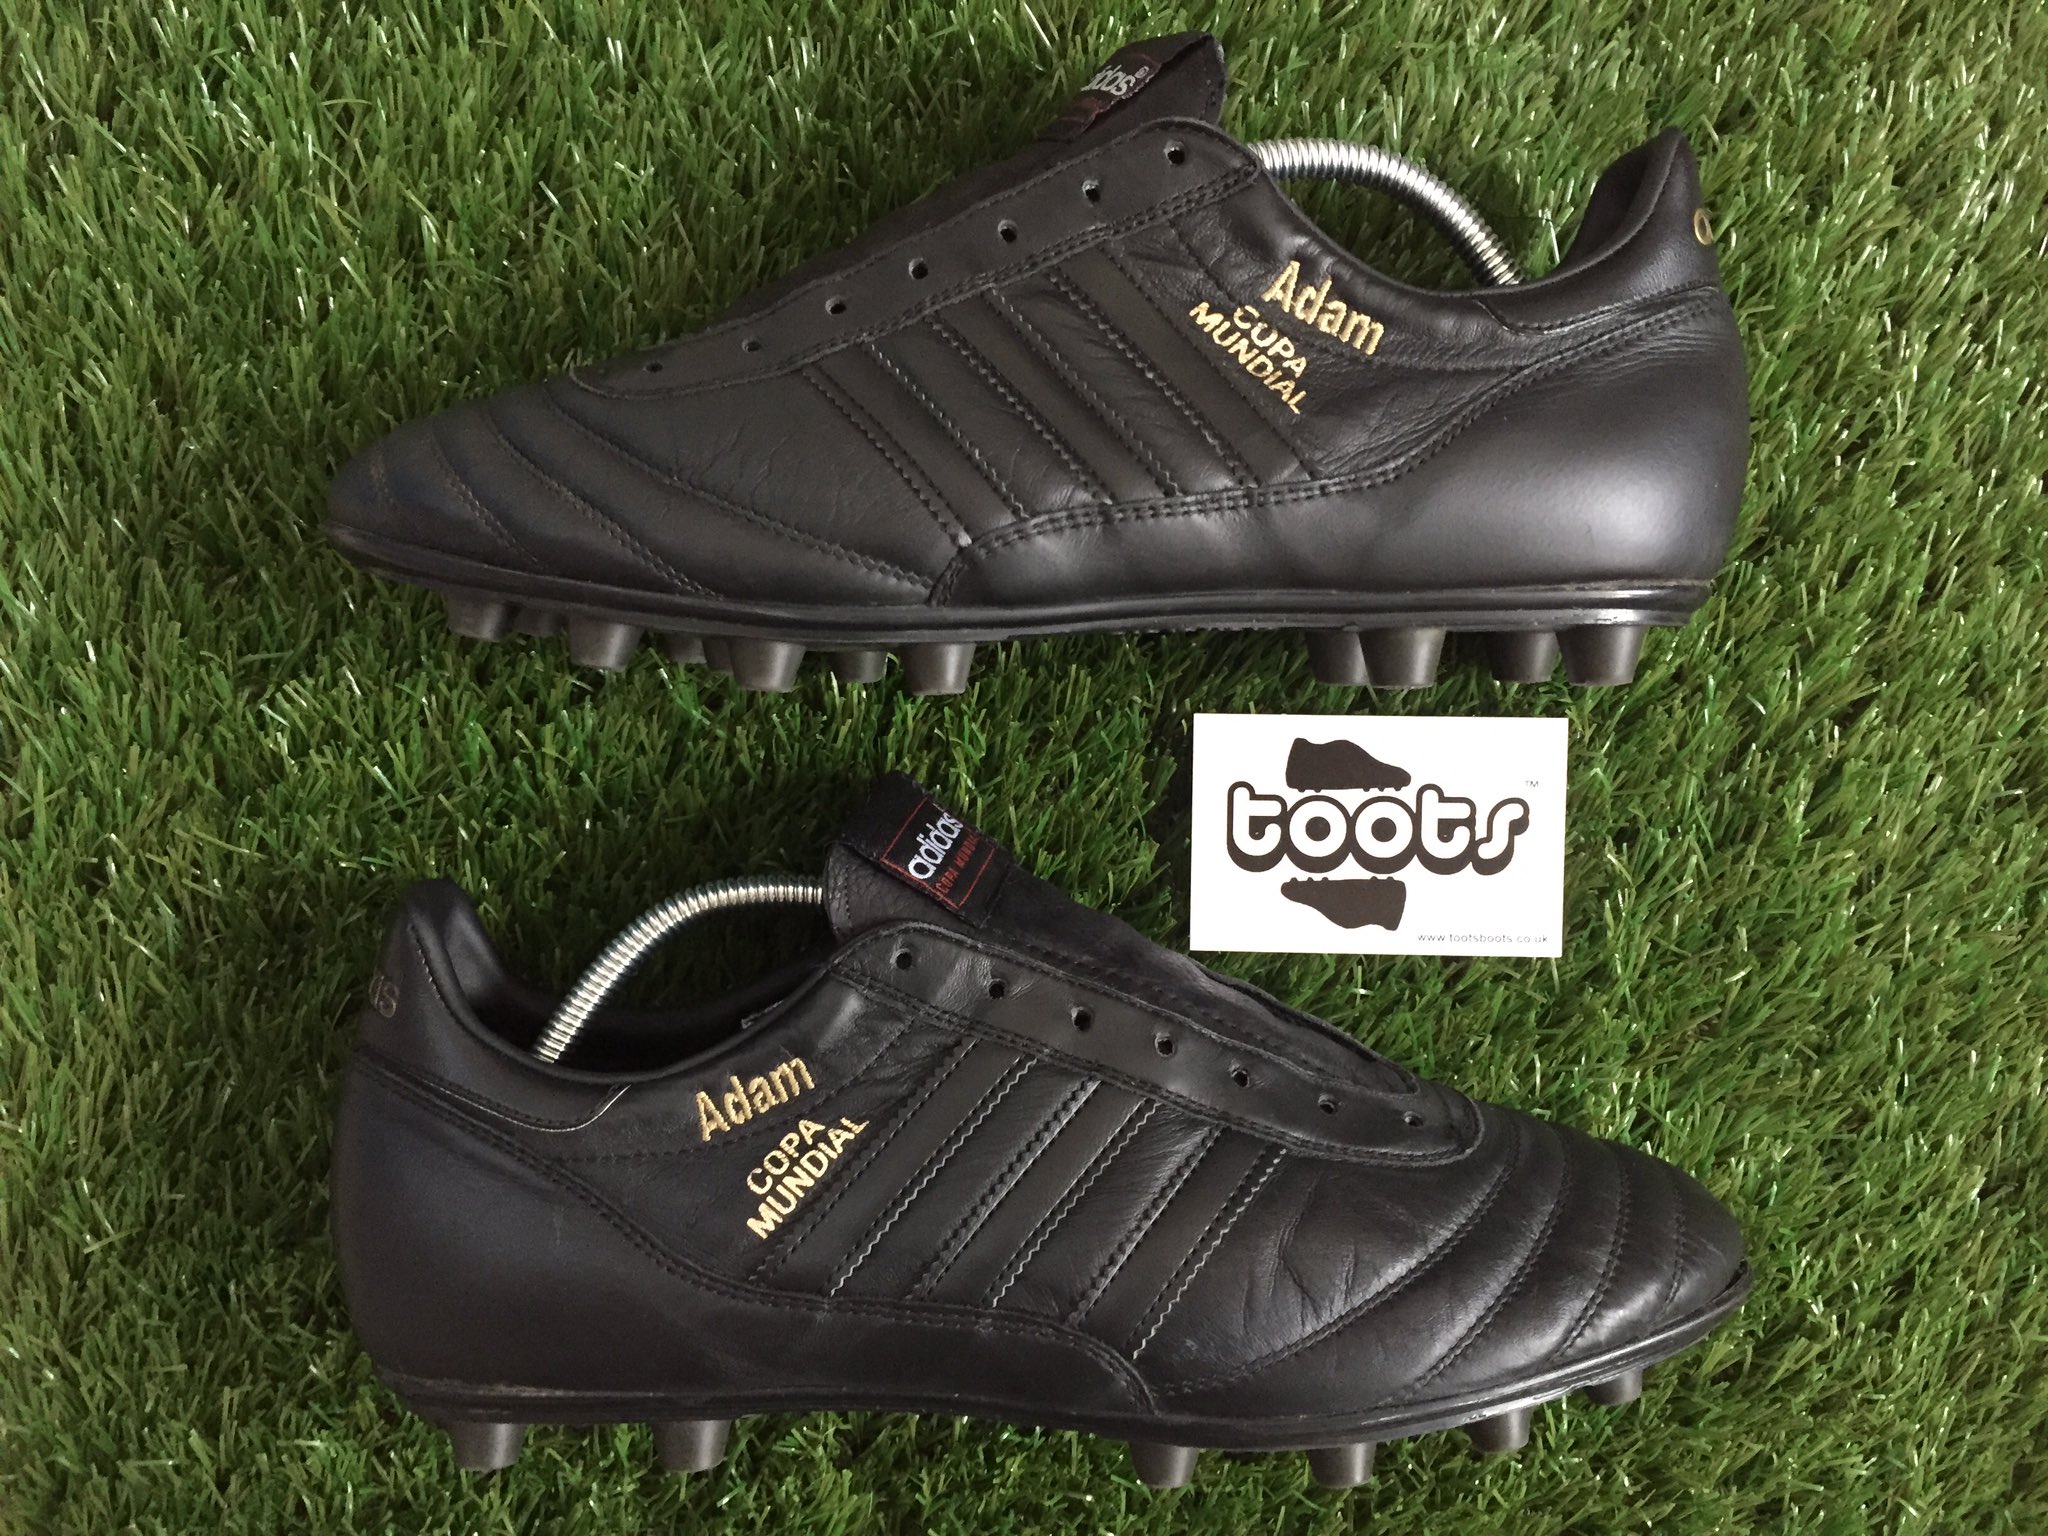 tootsboots on Twitter: "Short Tongue Conversion on these Ltd Edition Copa  Mundial #tootsboots https://t.co/IUbwYQExIS" / Twitter